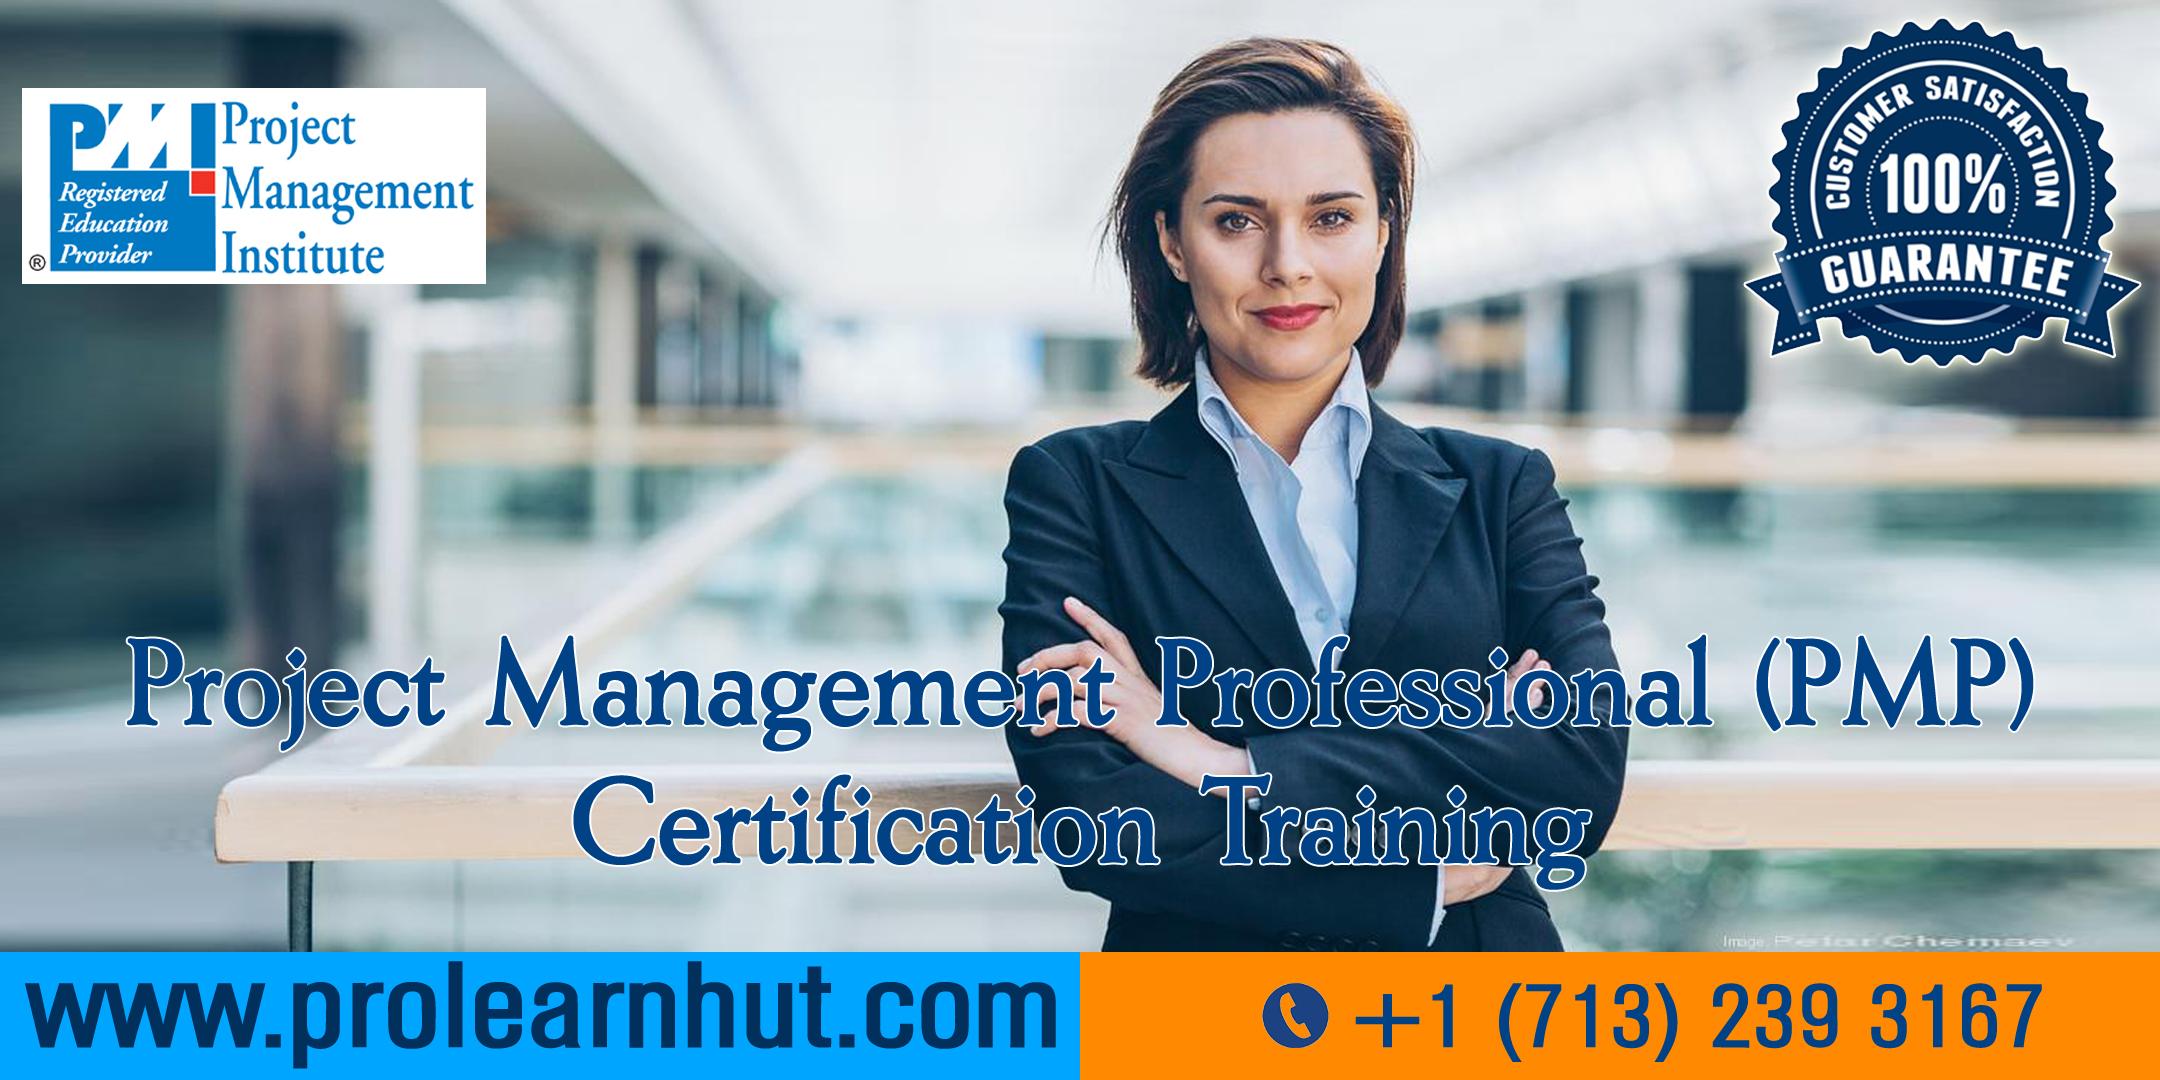 PMP Certification | Project Management Certification| PMP Training in Hartford, CT | ProLearnHut